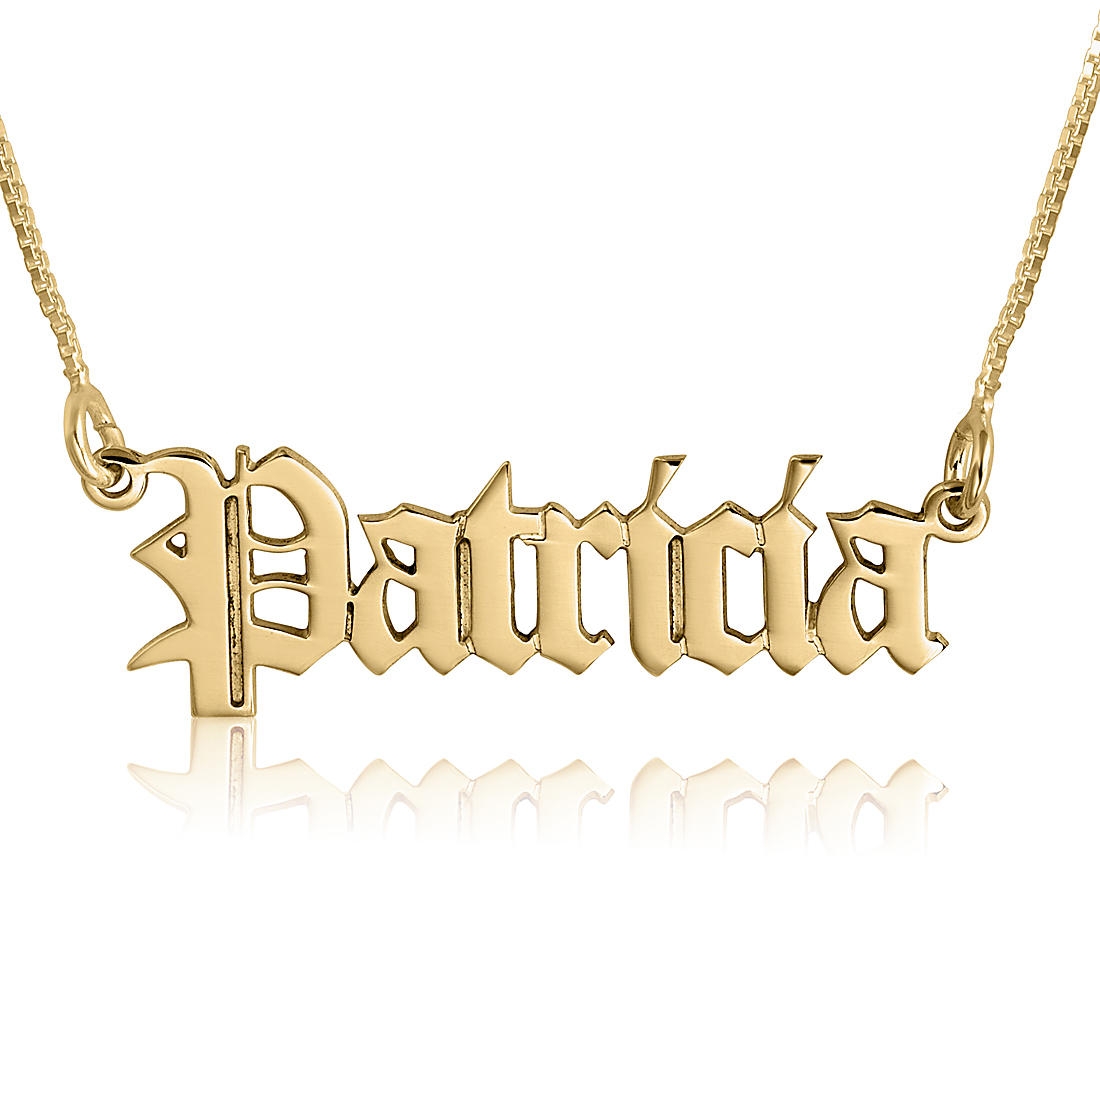 Initial Gothic necklace Old English font necklace gold custom necklace  personalized necklace Gothic necklaces for women